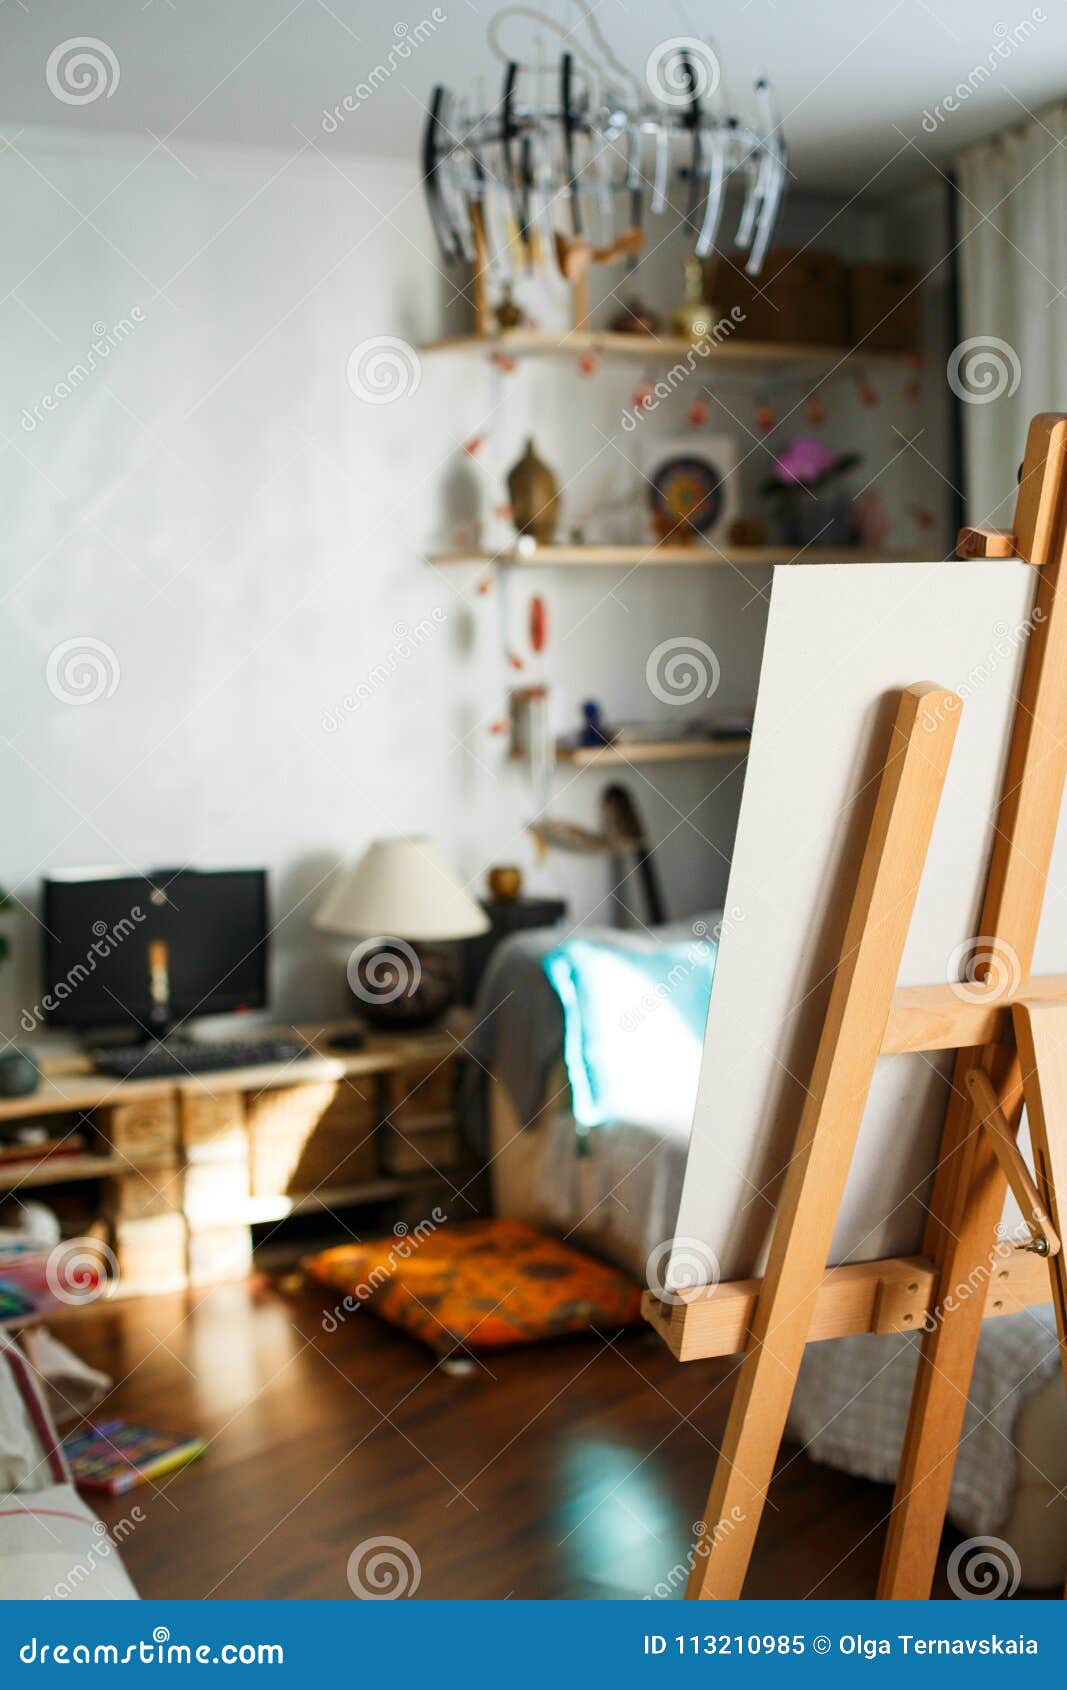 Artistic Equipment Artist Paper Or Canvas On Easel In An Artist